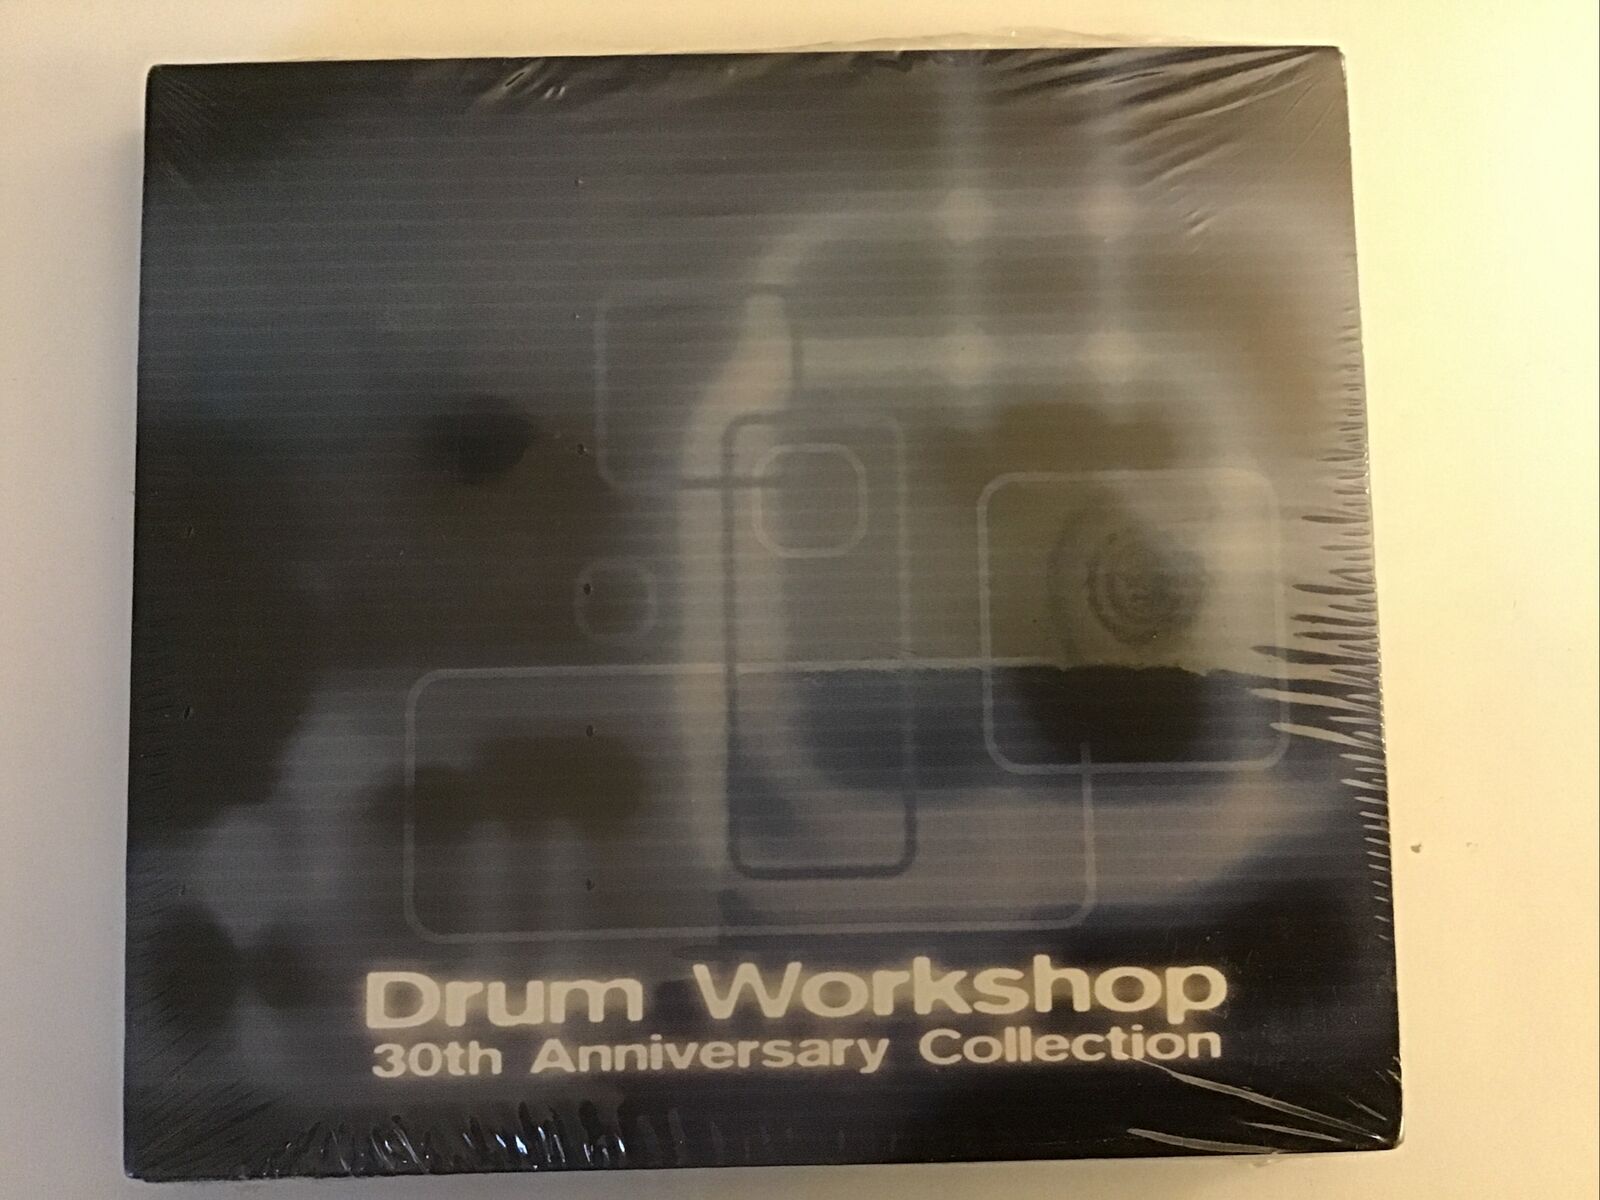 Drum Workshop, 30th Anniversary Collection, Sealed 2 CD Set